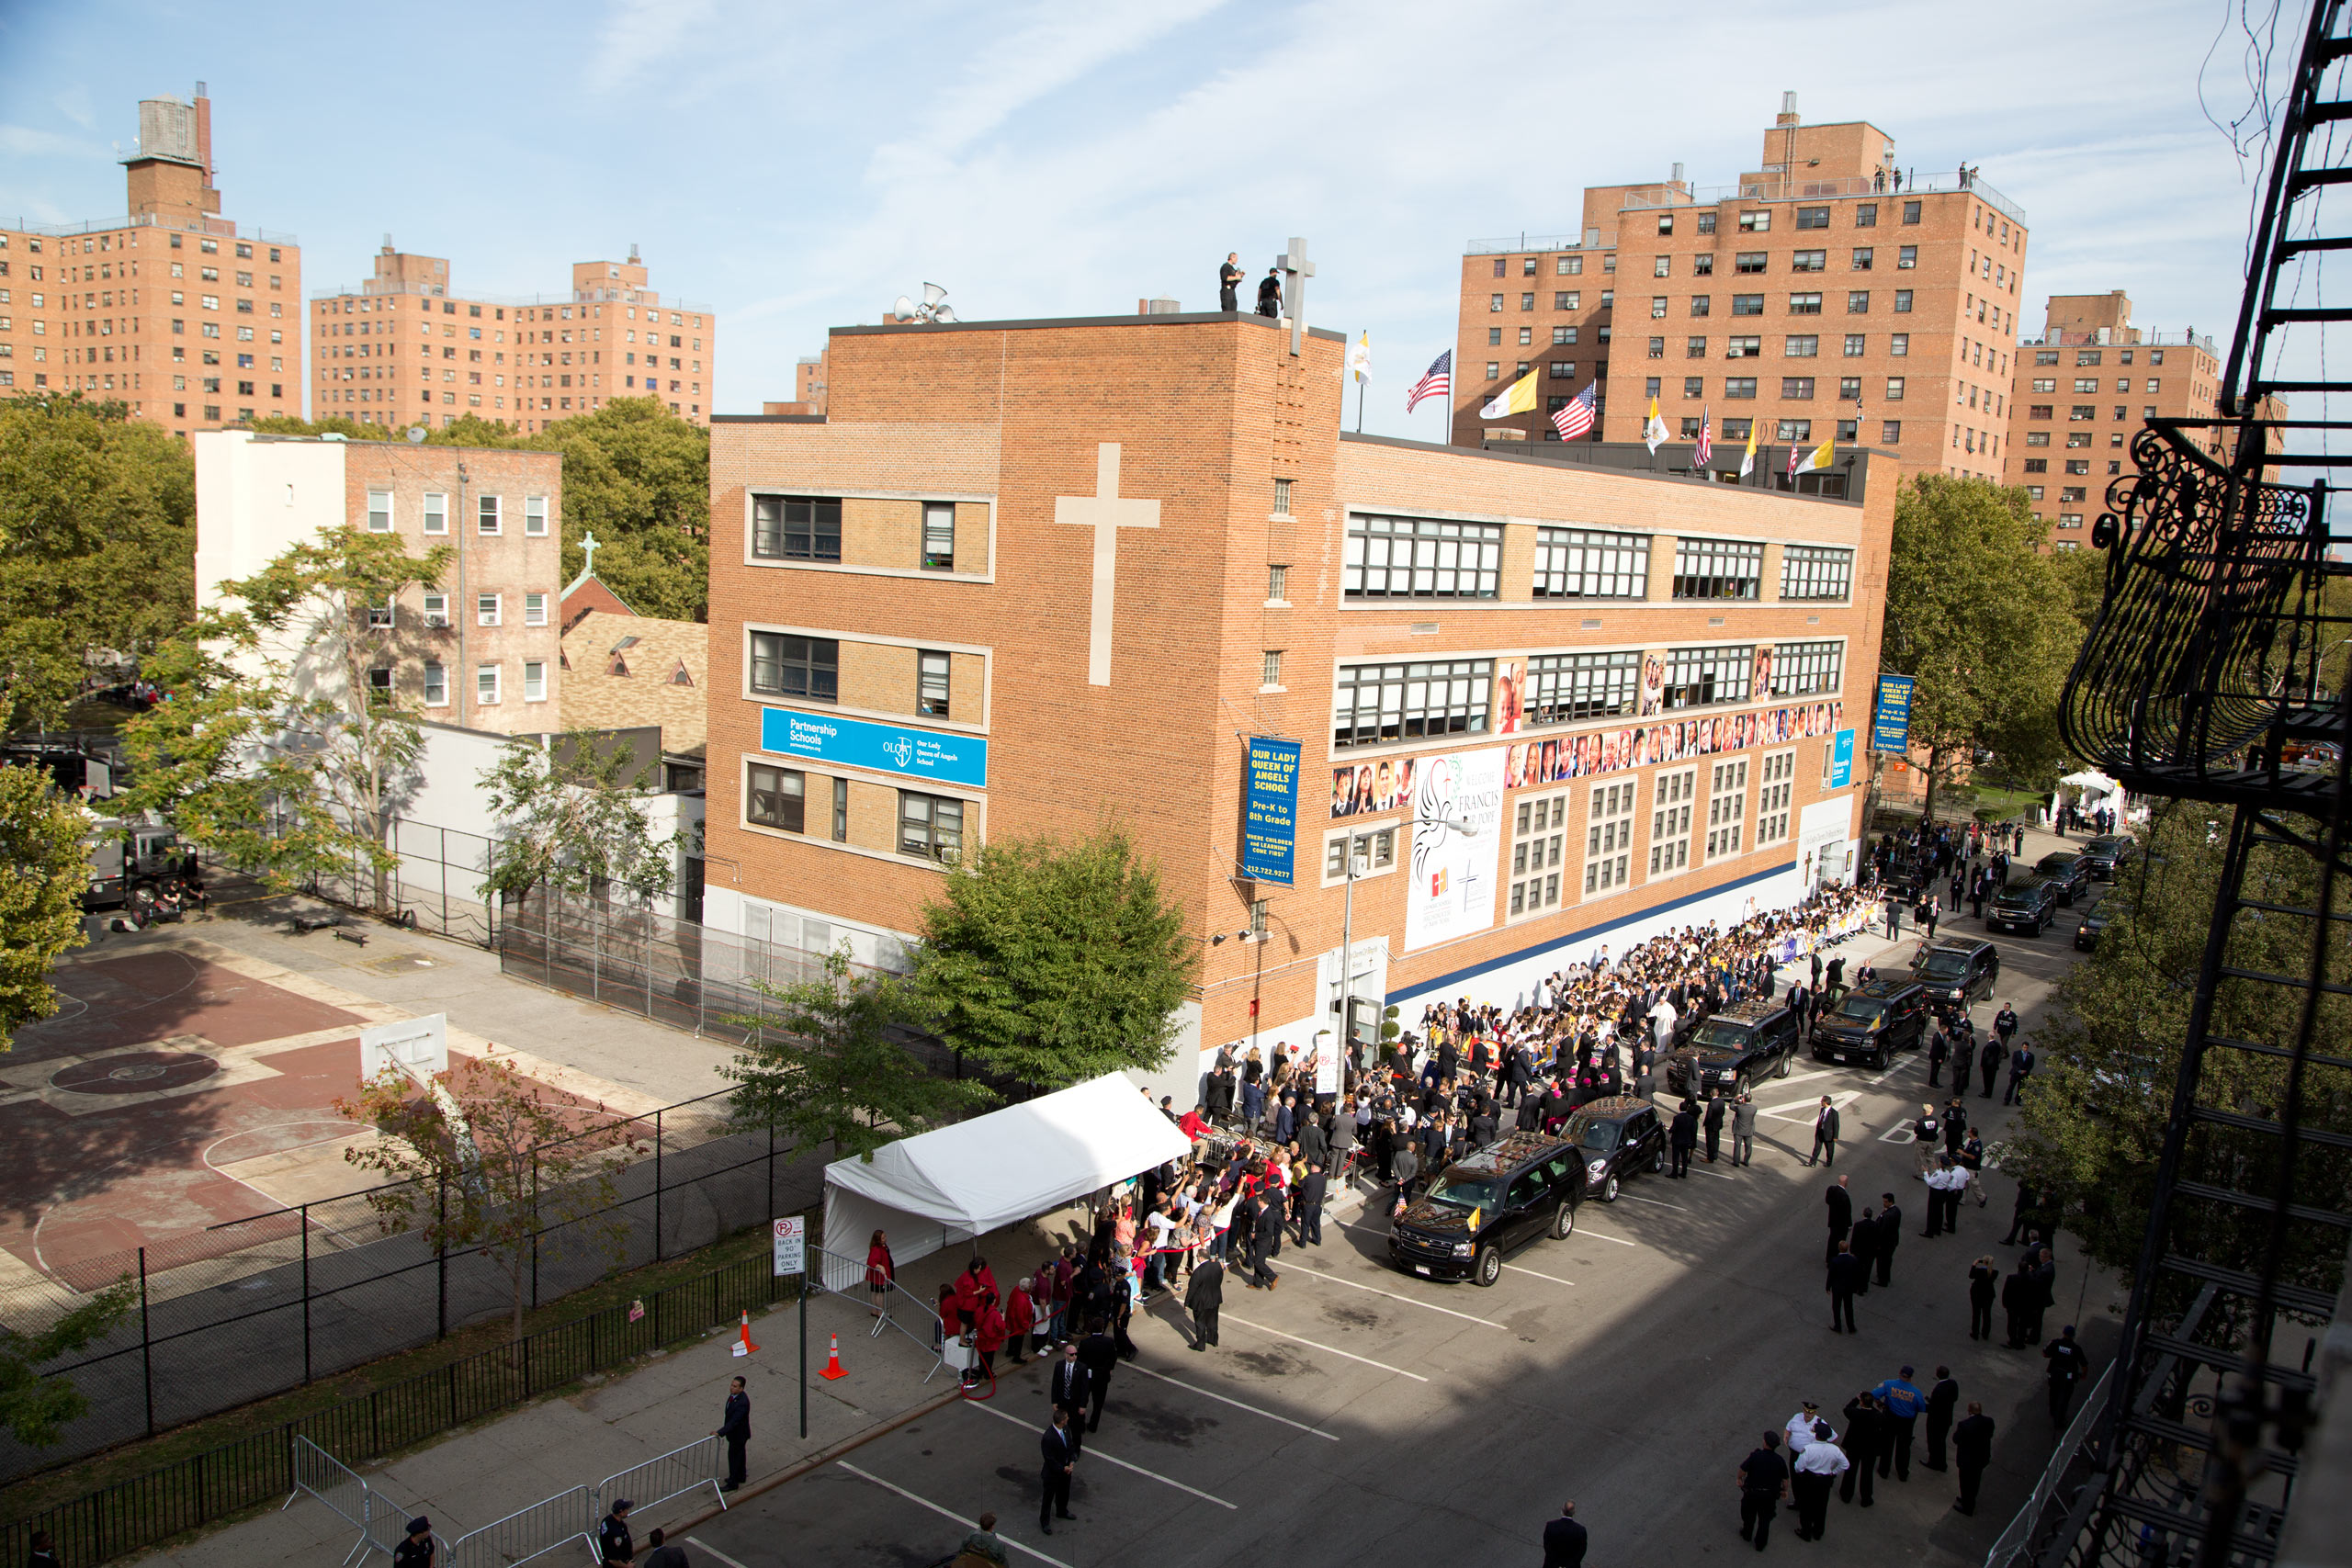 Pope Francis  visits Our Lady Queen of Angels School in East Harlem, New York. Sept, 25, 2015.